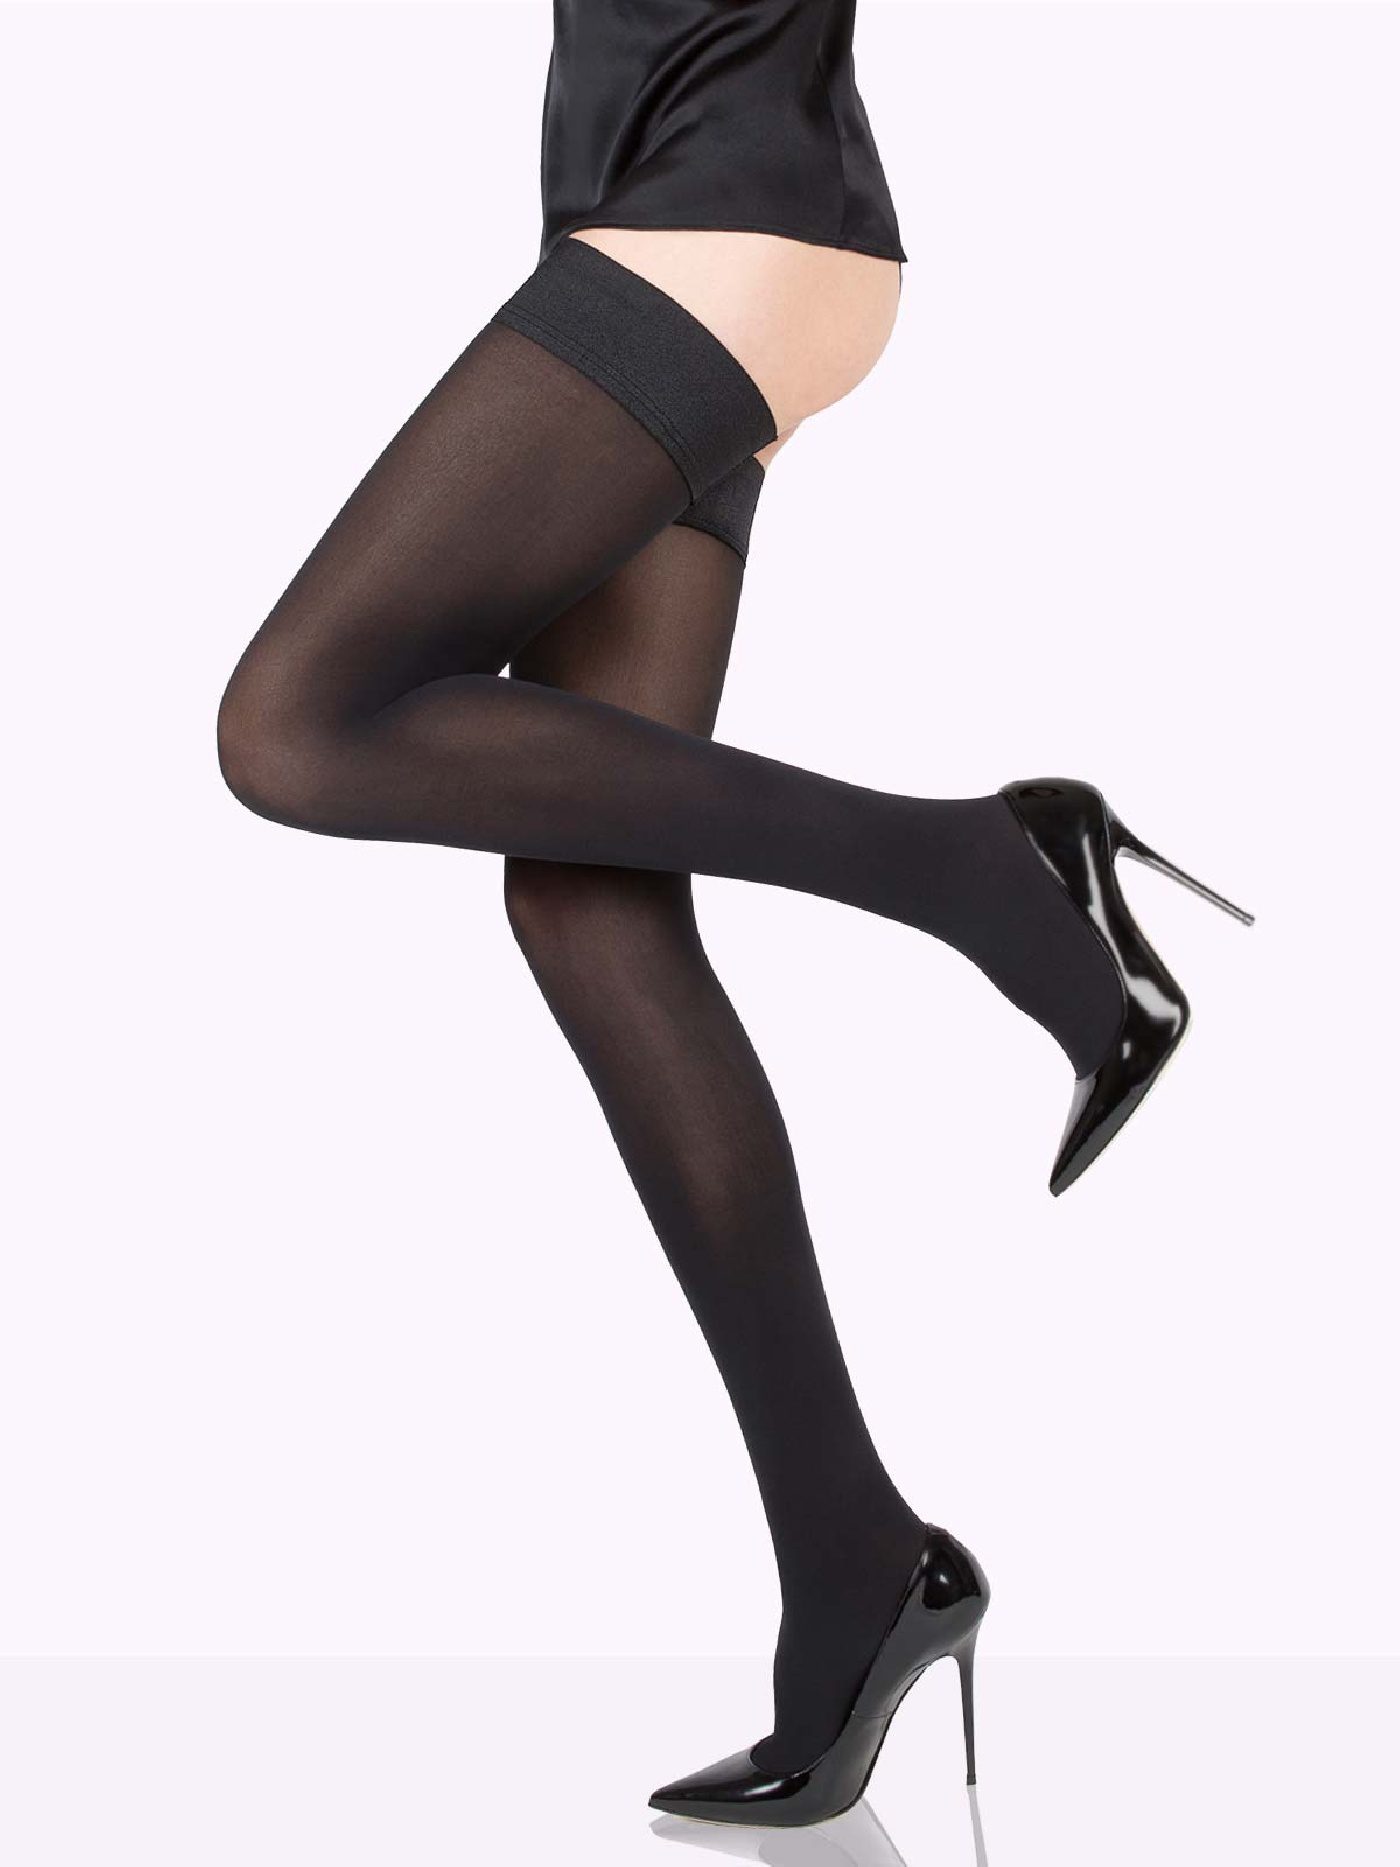 Best Tights and Stockings For Tall Women – VienneMilano